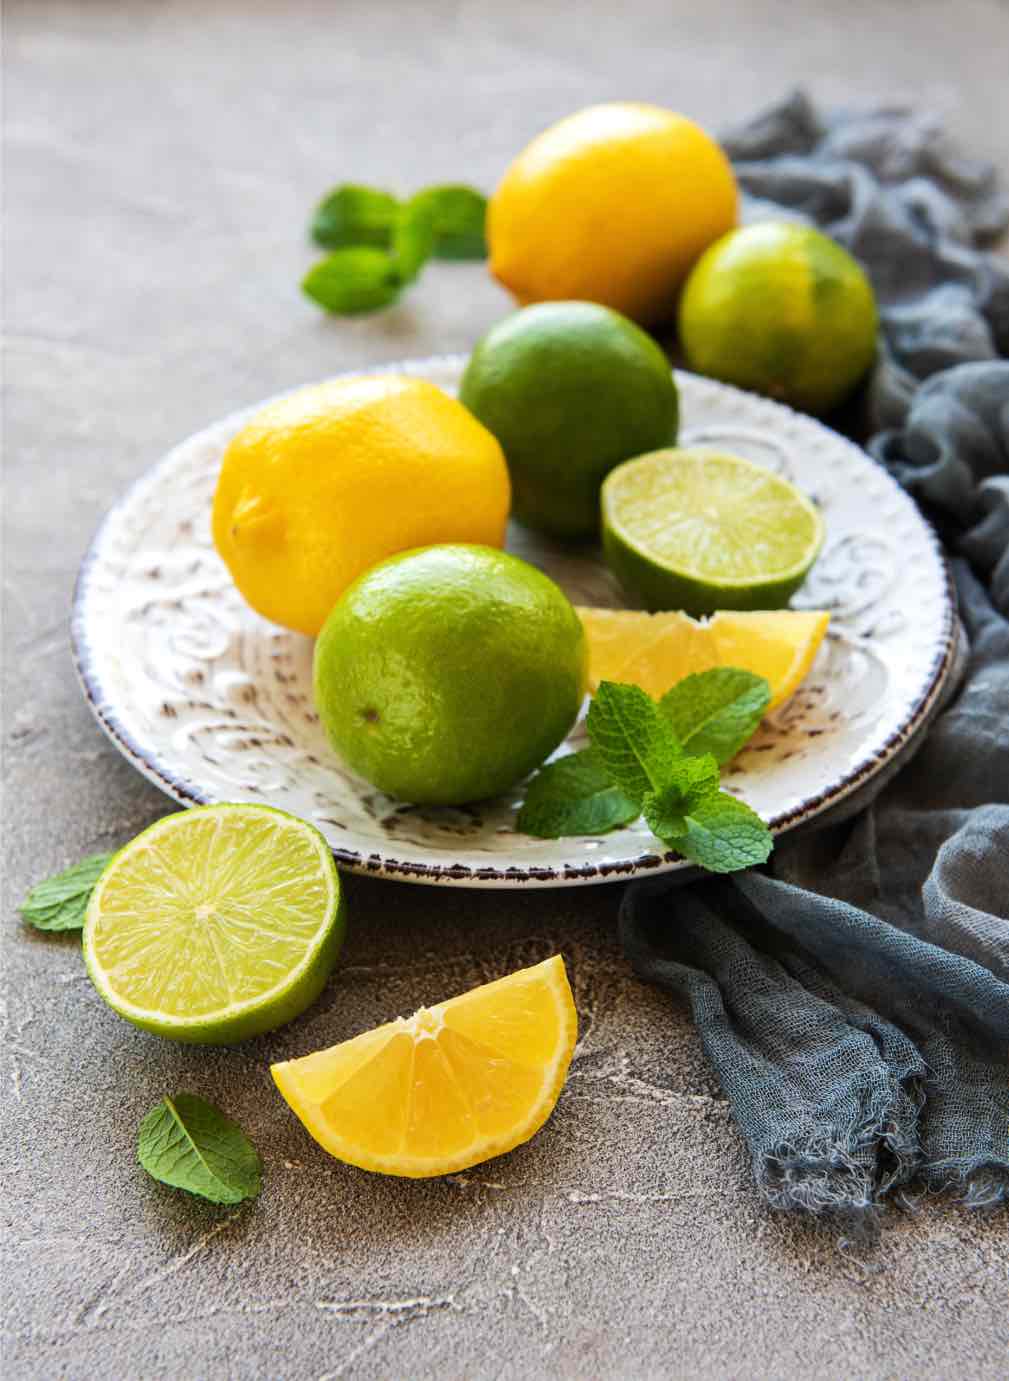 Lemons and limes are great for humans, but not for dogs - learn more with Dog Training Elite Northern Utah!